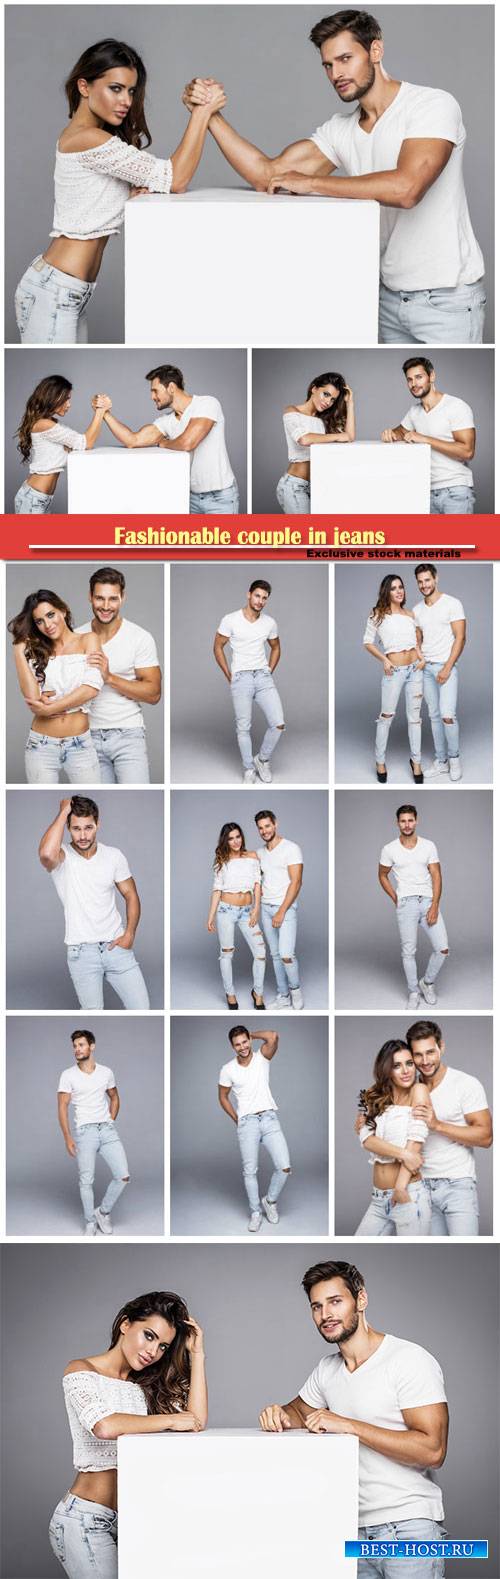 Fashionable couple in jeans